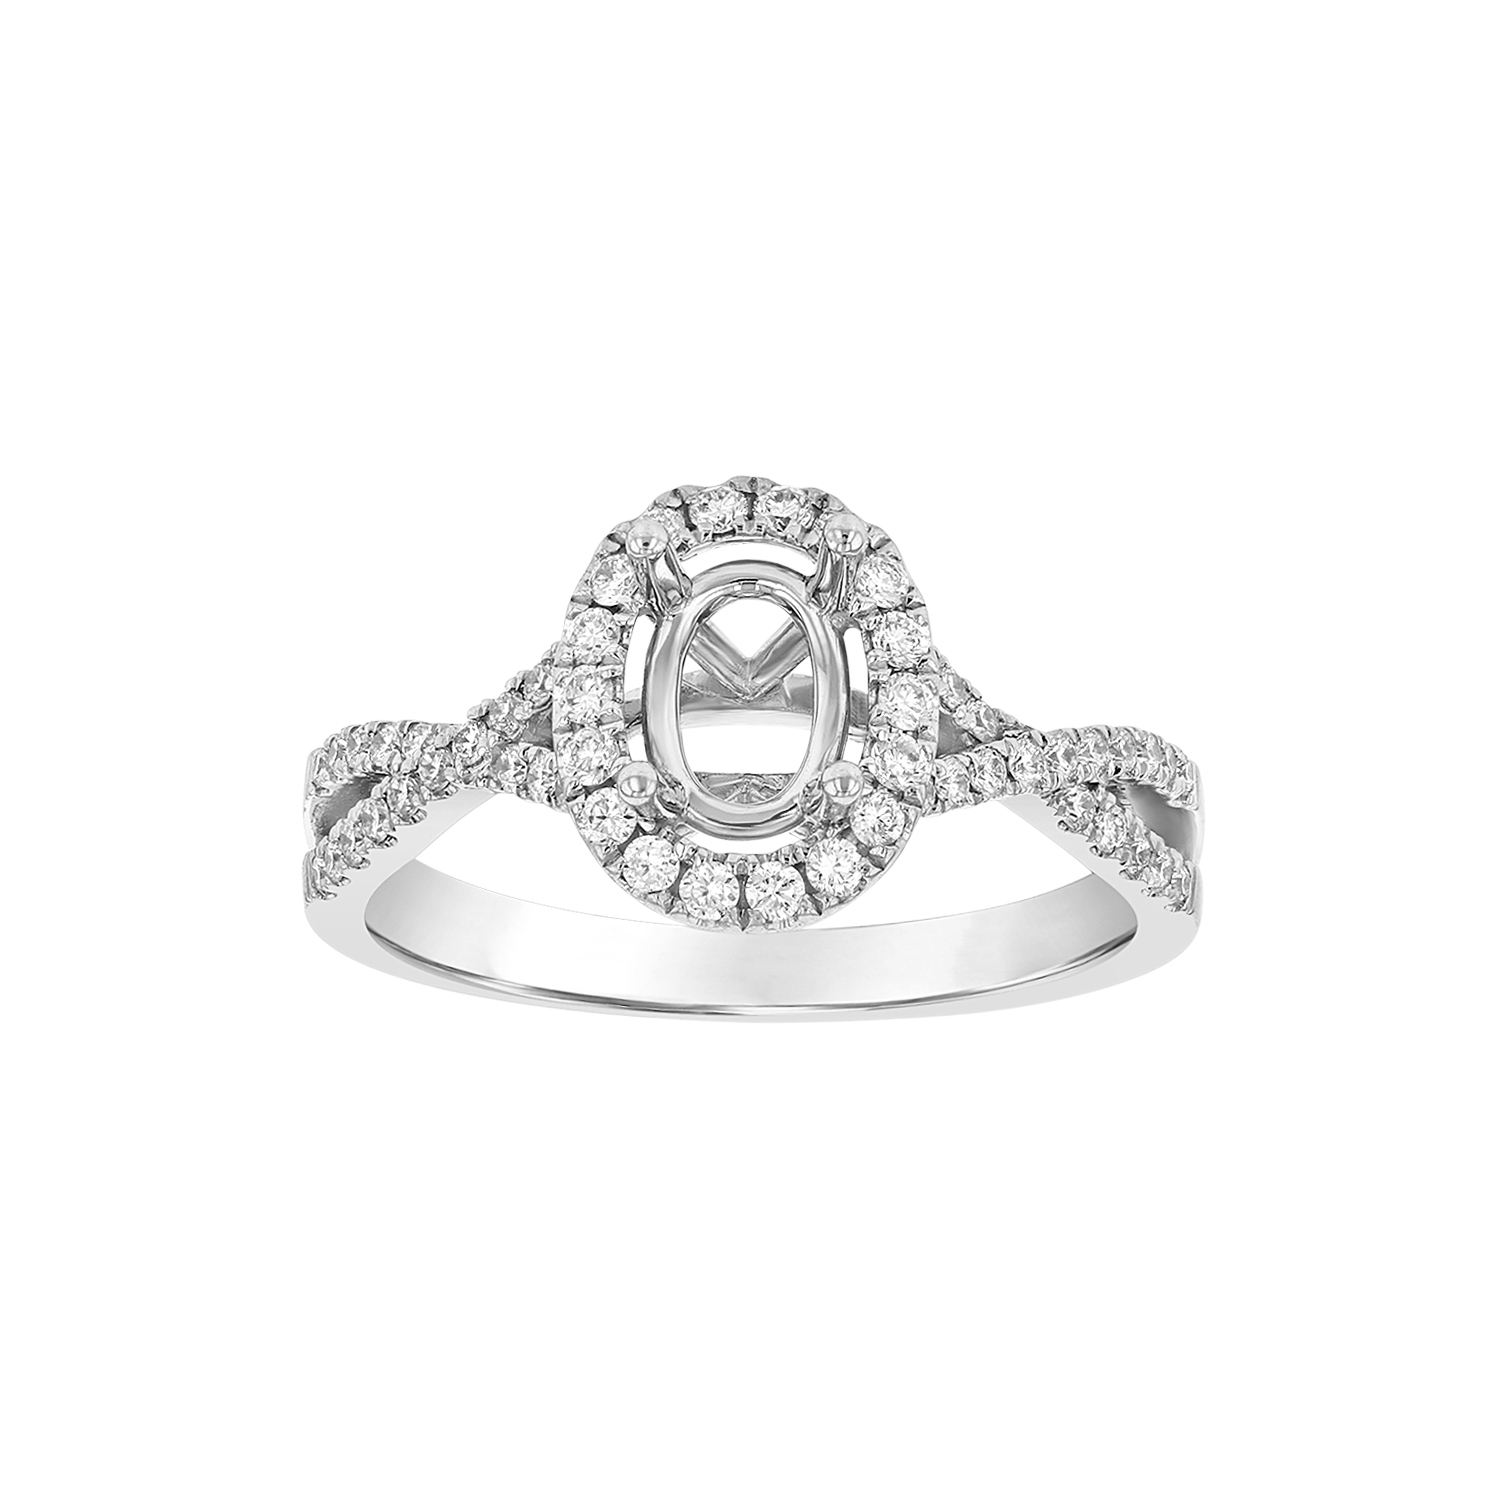 View 0.36ctw Diamond Oval Shaped Semi Mount in 18k White Gold